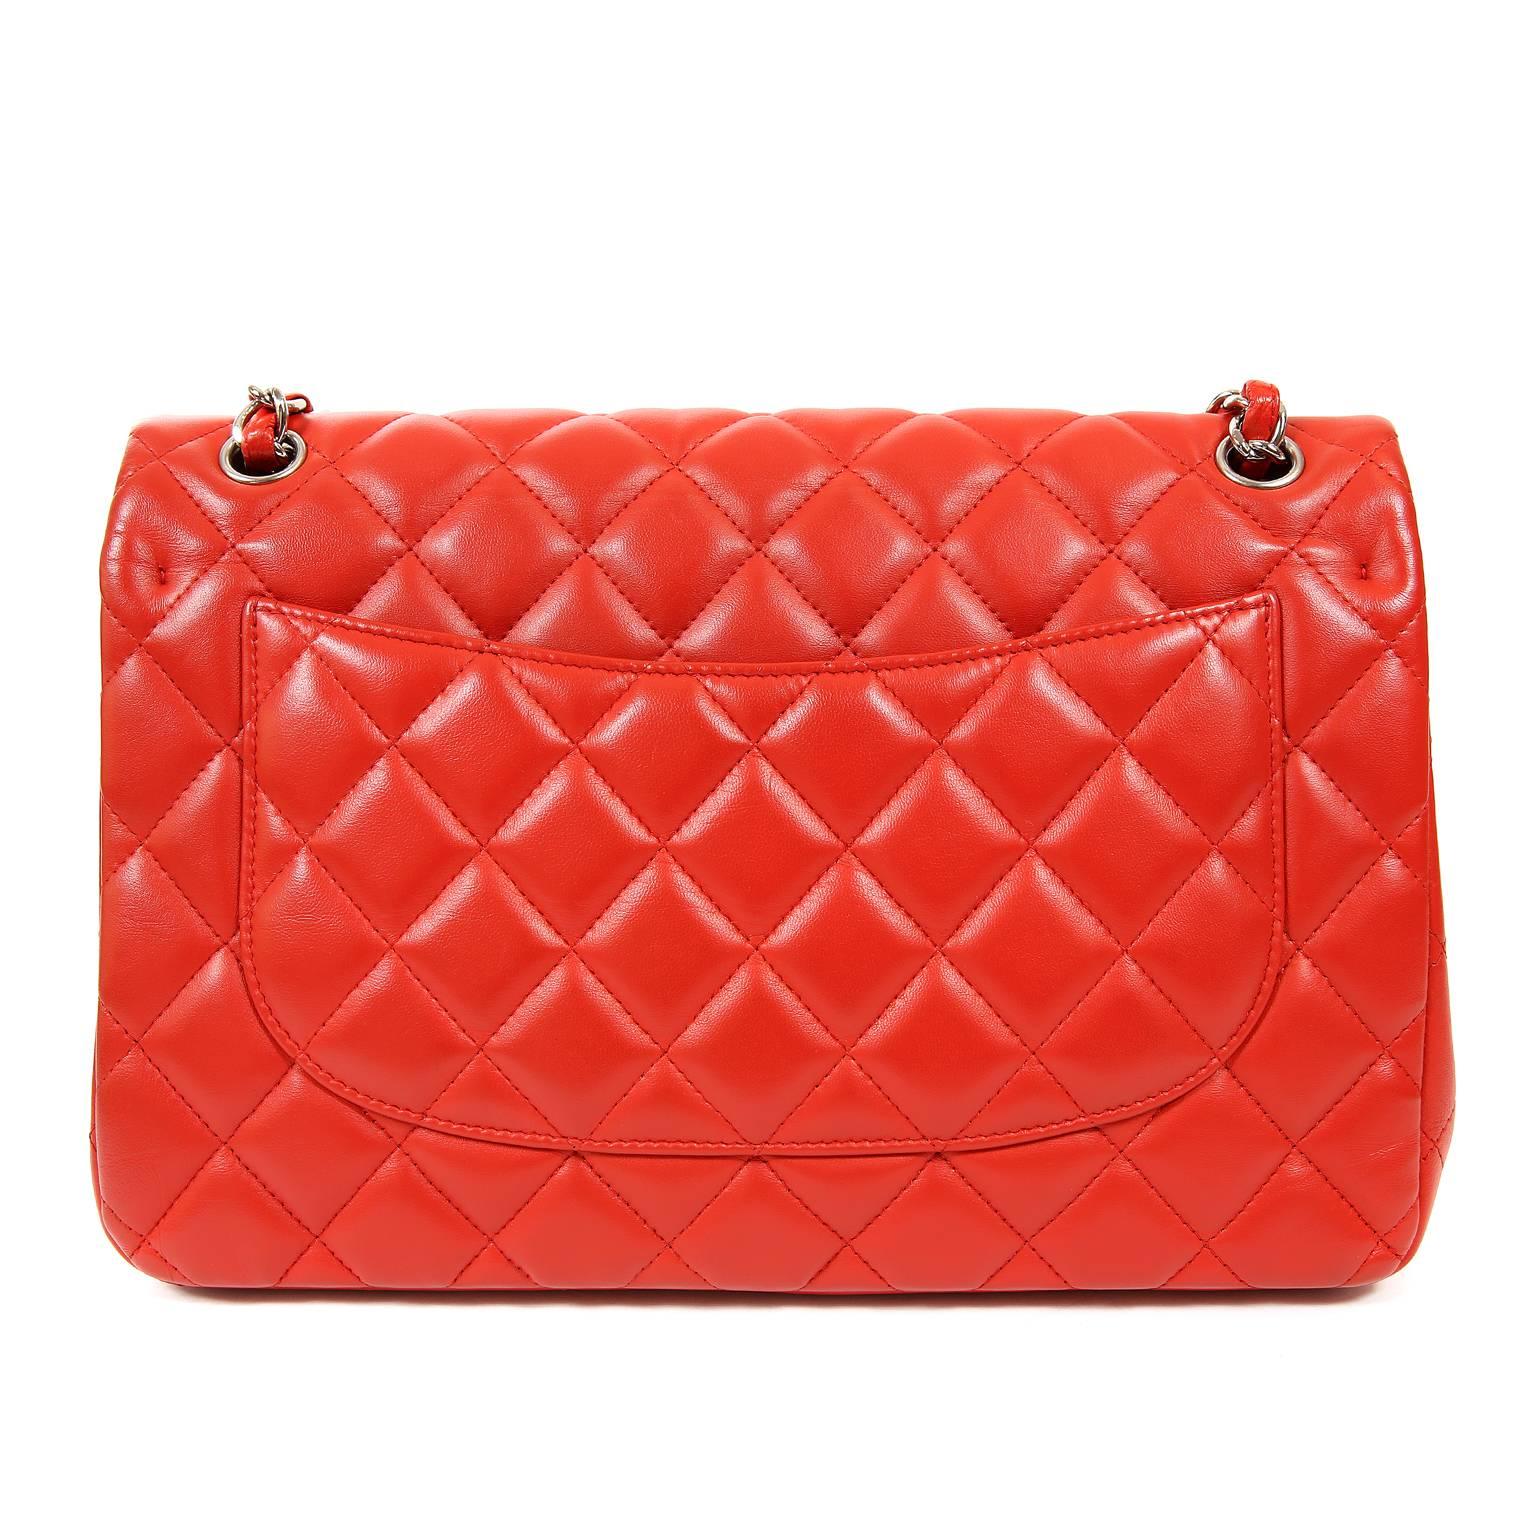 Chanel Red Lambskin Jumbo Classic Double Flap Bag- PRISTINE.  Never Before Carried. 
The highly sought-after Jumbo Classic is exquisite in lipstick red lambskin with silver hardware.  
Vibrant red lambskin is quilted in signature Chanel diamond